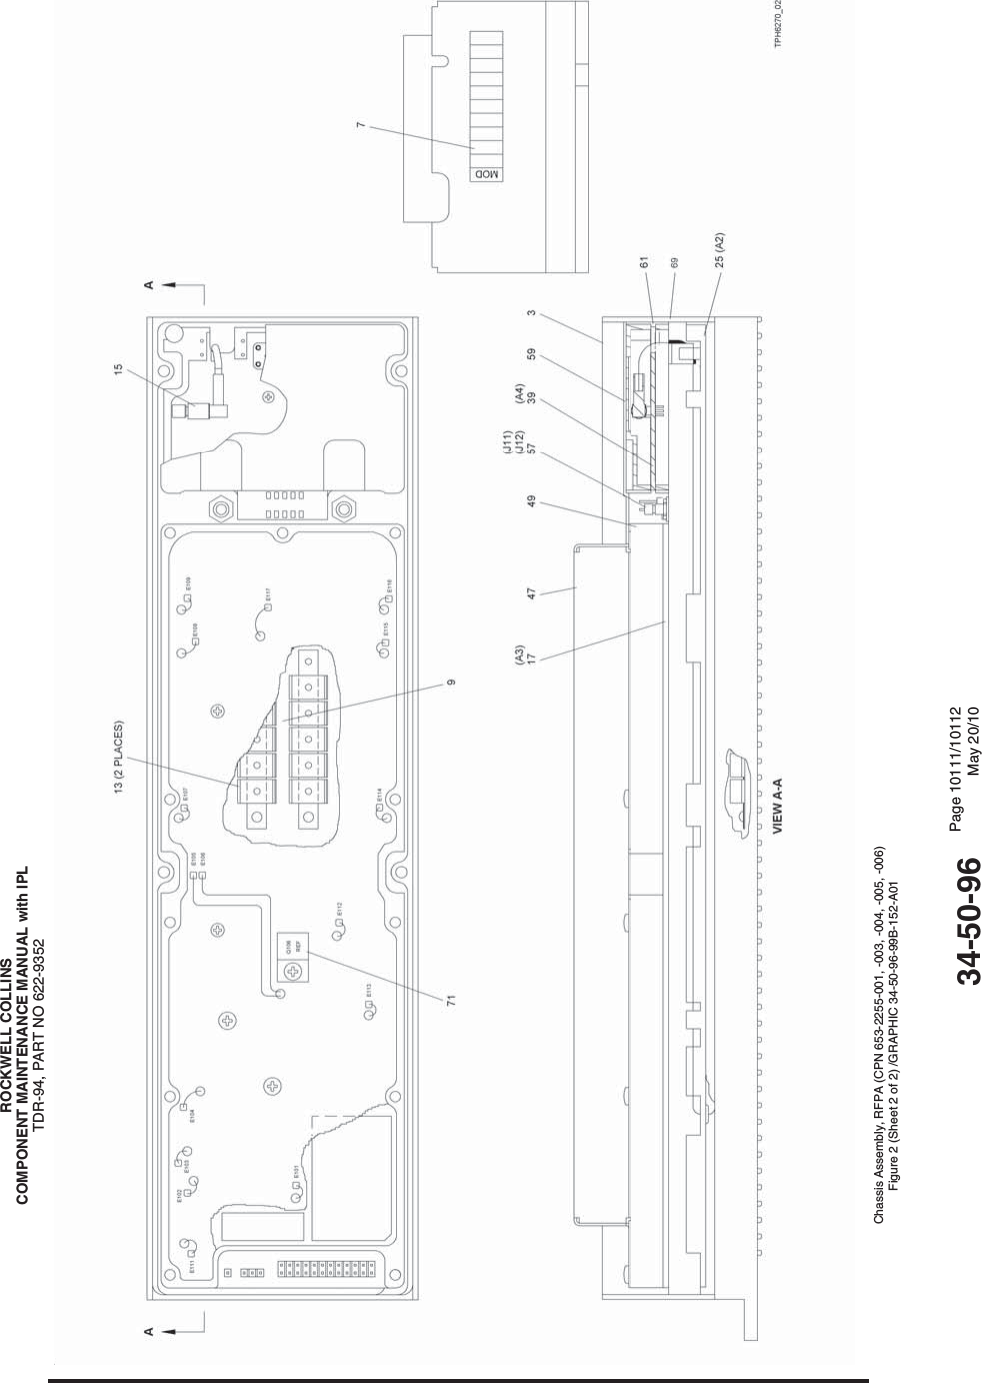 ROCKWELL COLLINSCOMPONENT MAINTENANCE MANUAL with IPLTDR-94, PART NO 622-9352Chassis Assembly, RFPA (CPN 653-2255-001, -003, -004, -005, -006)Figure 2 (Sheet 2 of 2) /GRAPHIC 34-50-96-99B-152-A0134-50-96 Page 10111/10112May 20/10